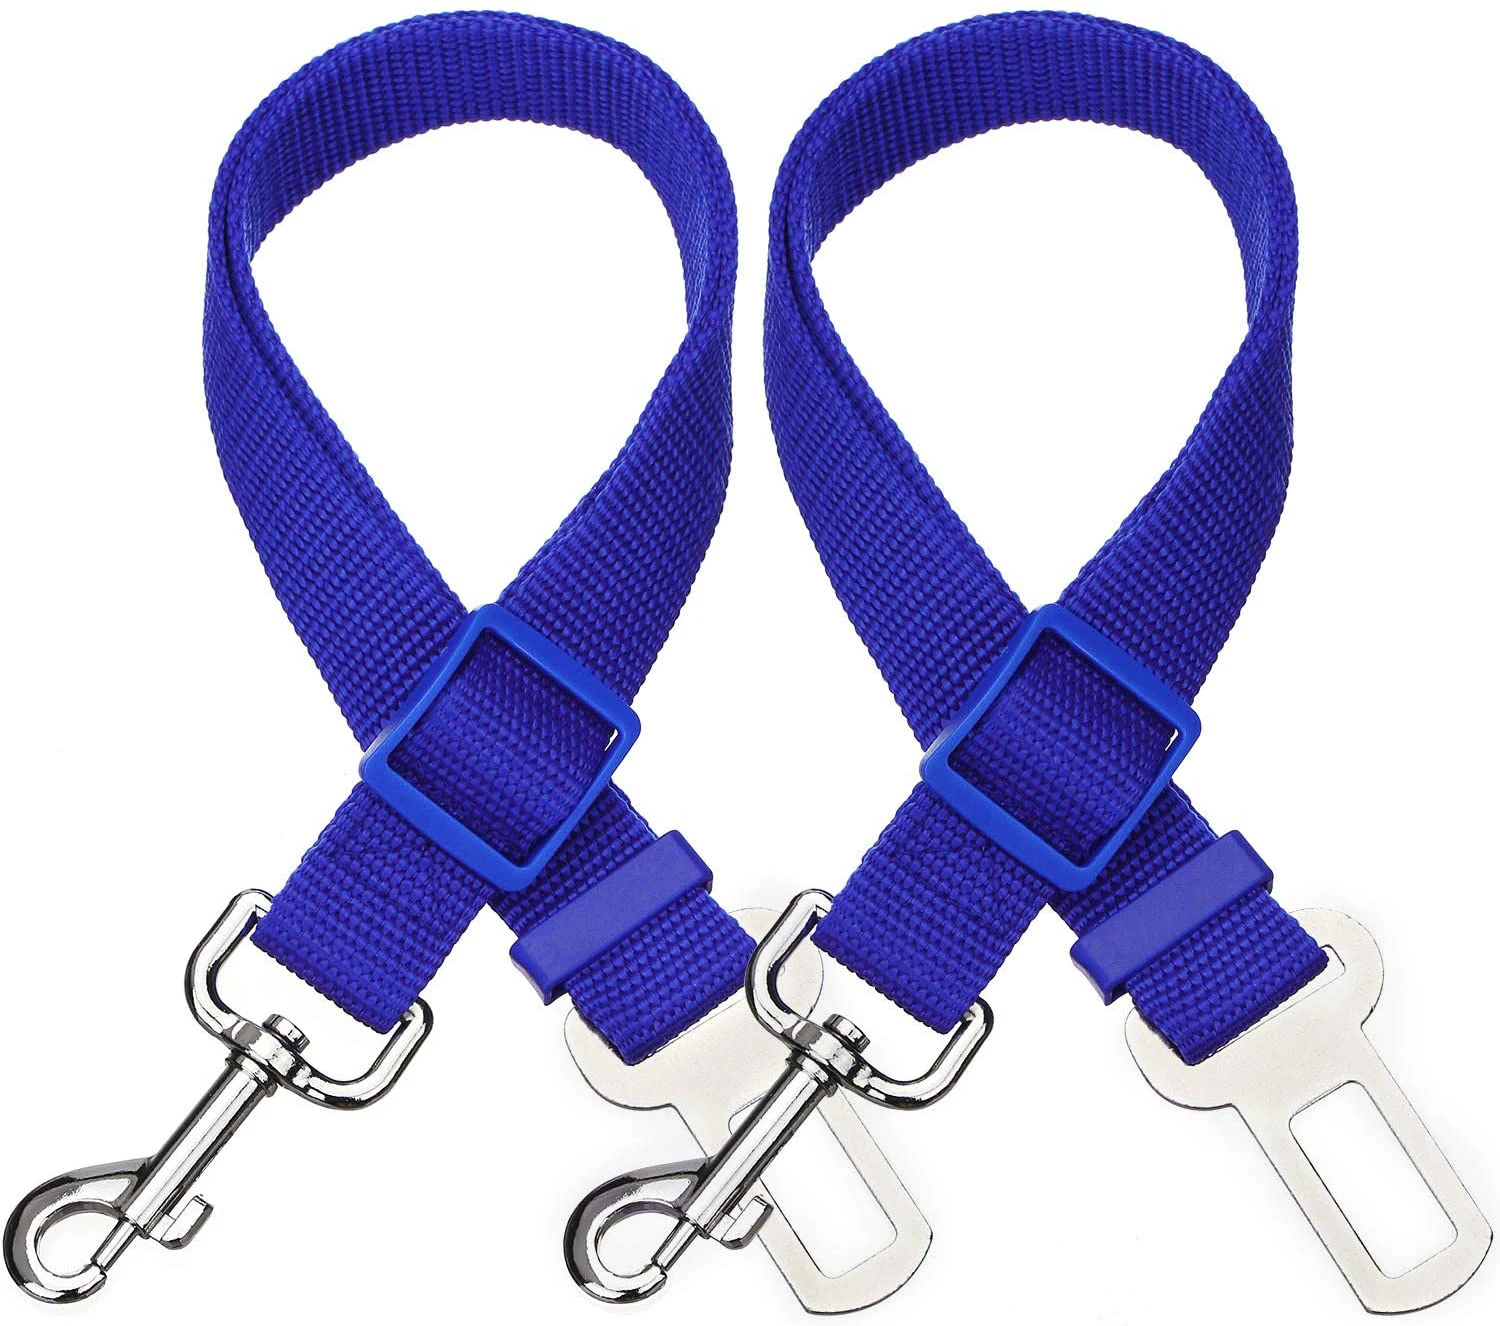 High Quality Wear-Resistant Rugged Durable Safety Comfortable Car Seat Belt Seat Belts For Cars